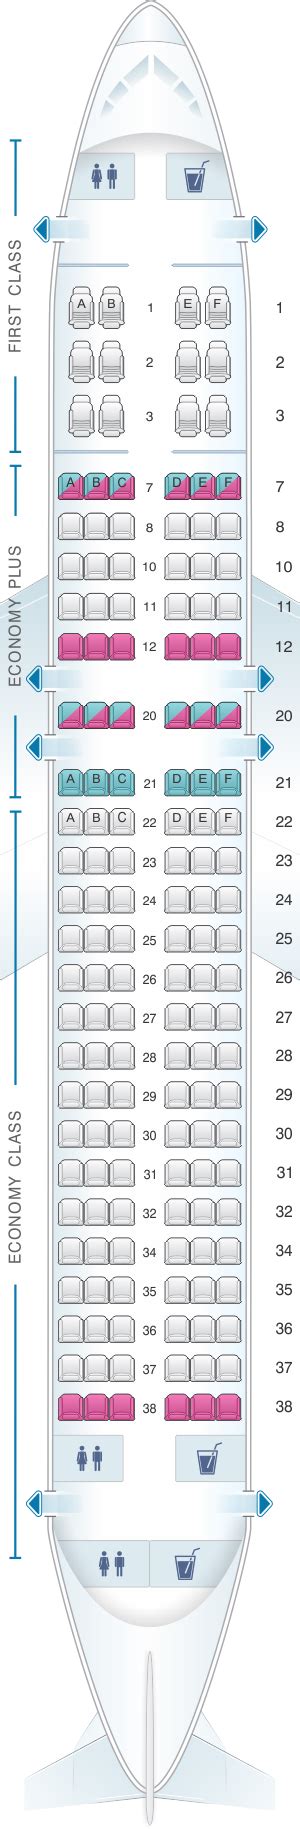 United Airlines A320 Seating Chart